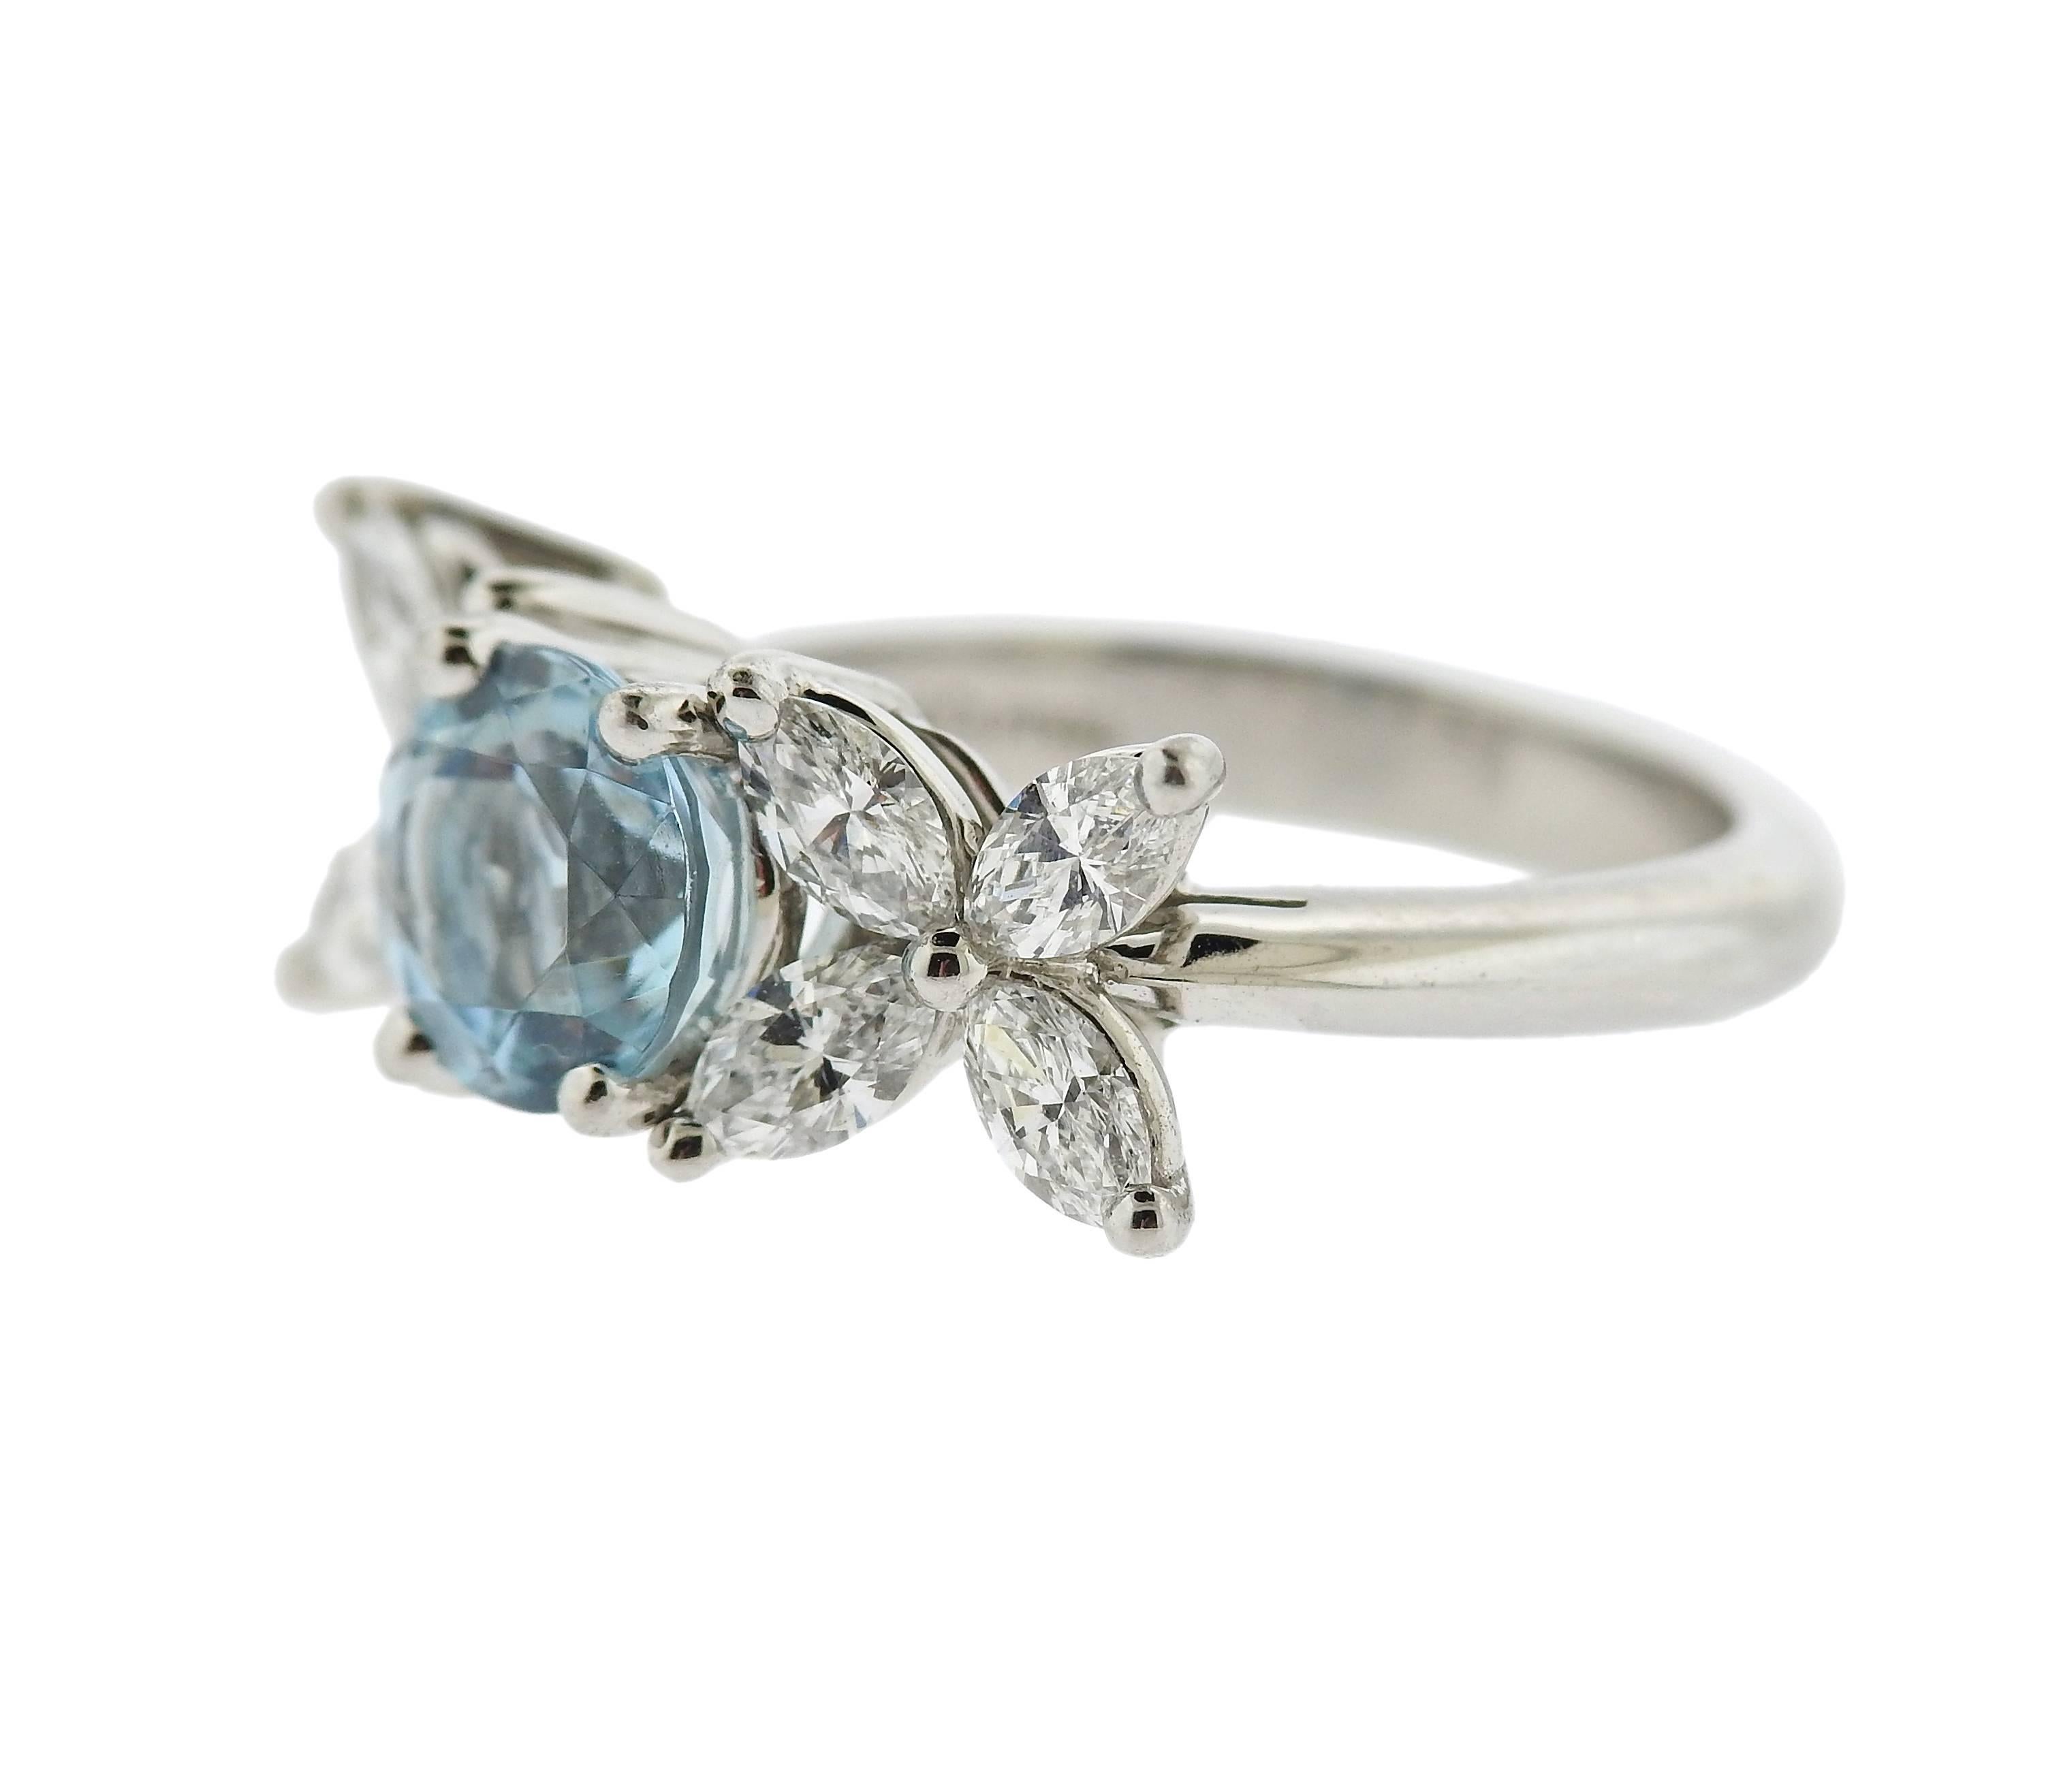 Delicate platinum ring, crafted by Tiffany & Co for Victoria collection, set with a round aquamarine in the center - approx. 1.20ct, surrounded with approx. 0.80ctw in marquis diamonds. Ring size 5 3/4, ring top is 8mm x 20mm. Marked: Tiffany